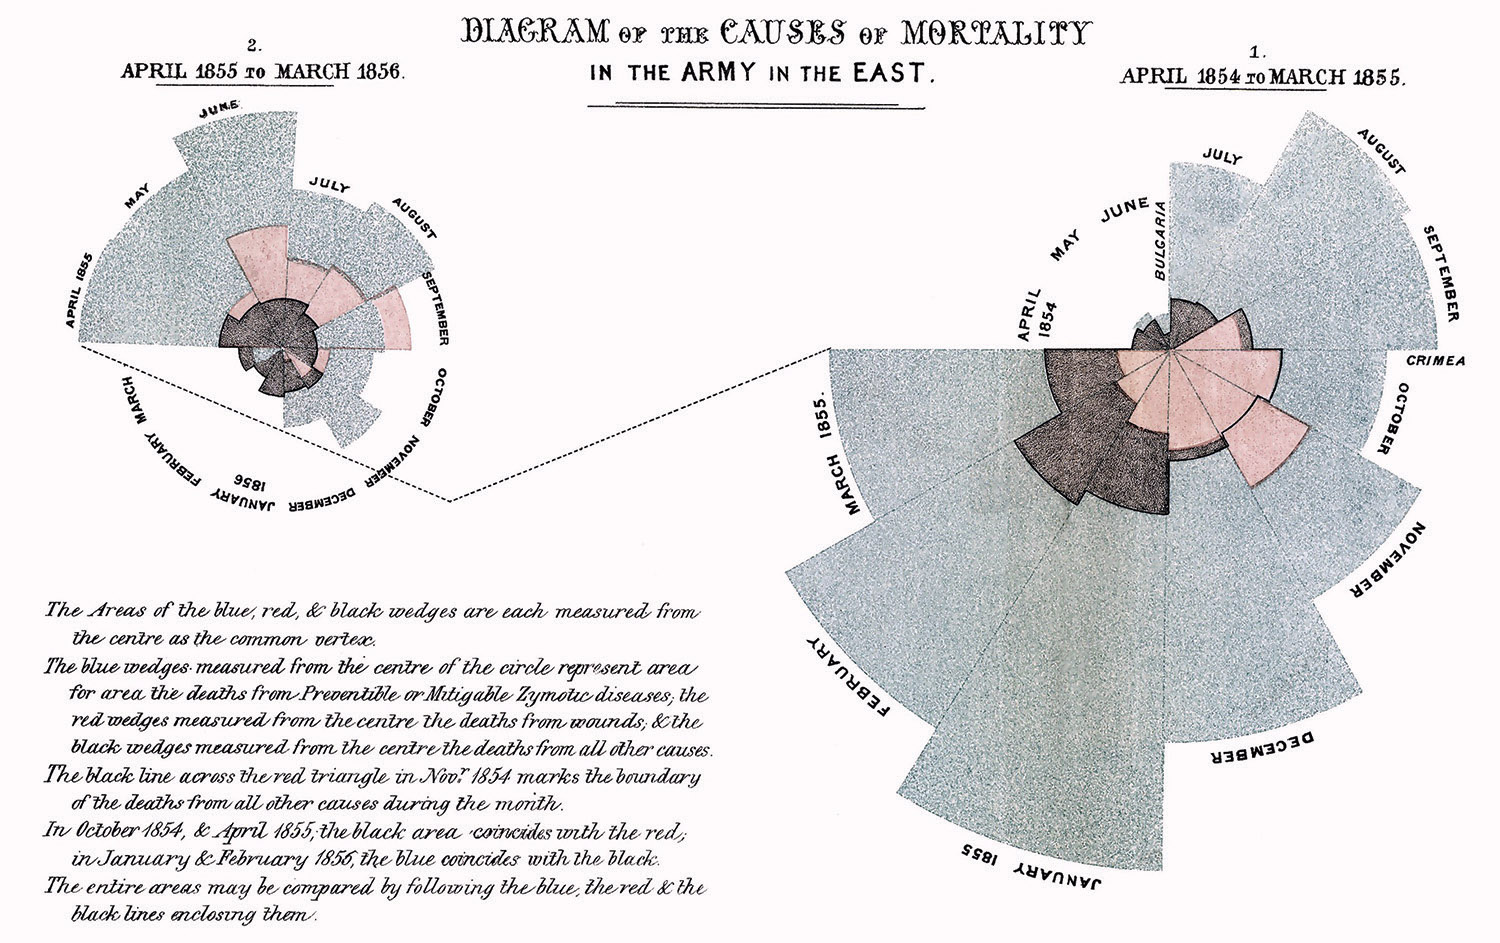 “Diagram of the Causes of Mortality in the Army in the East,” in F. Nightingale, A Contribution to the Sanitary History of the British Army during the Late War with Russia (London: John W. Parker, 1859). (Wellcome Collection)